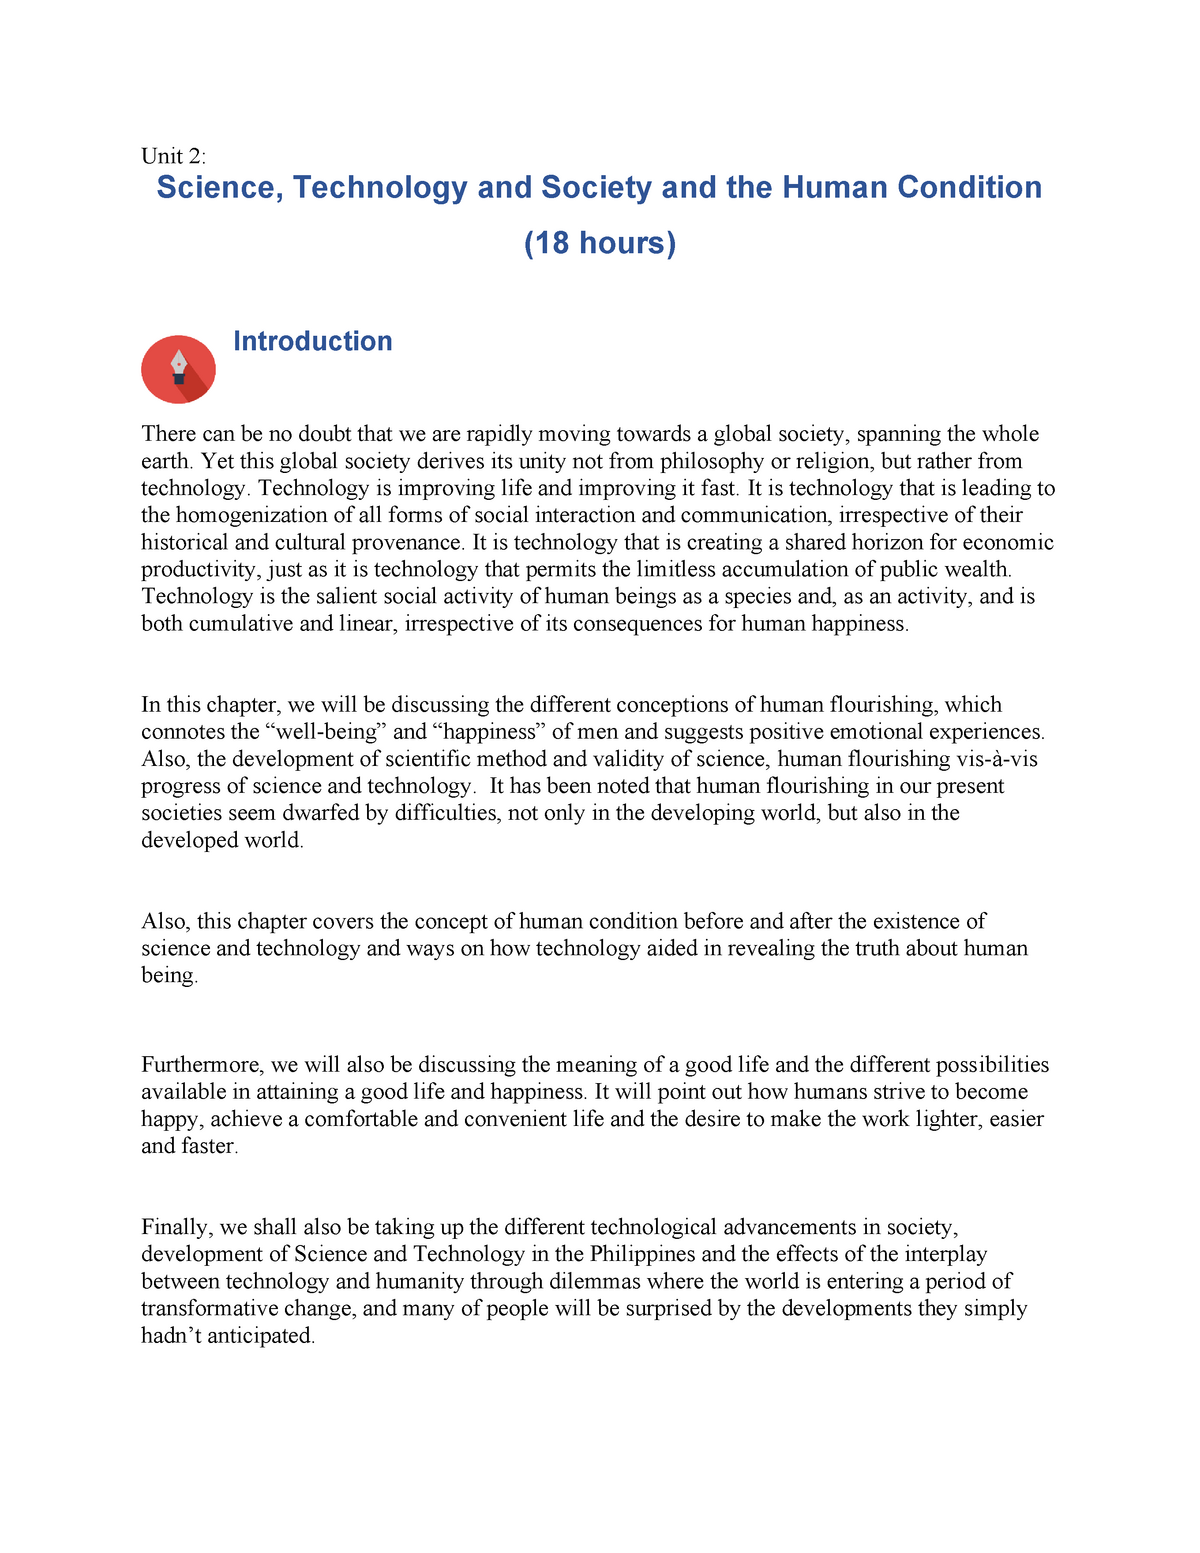 science technology and society and the human condition essay